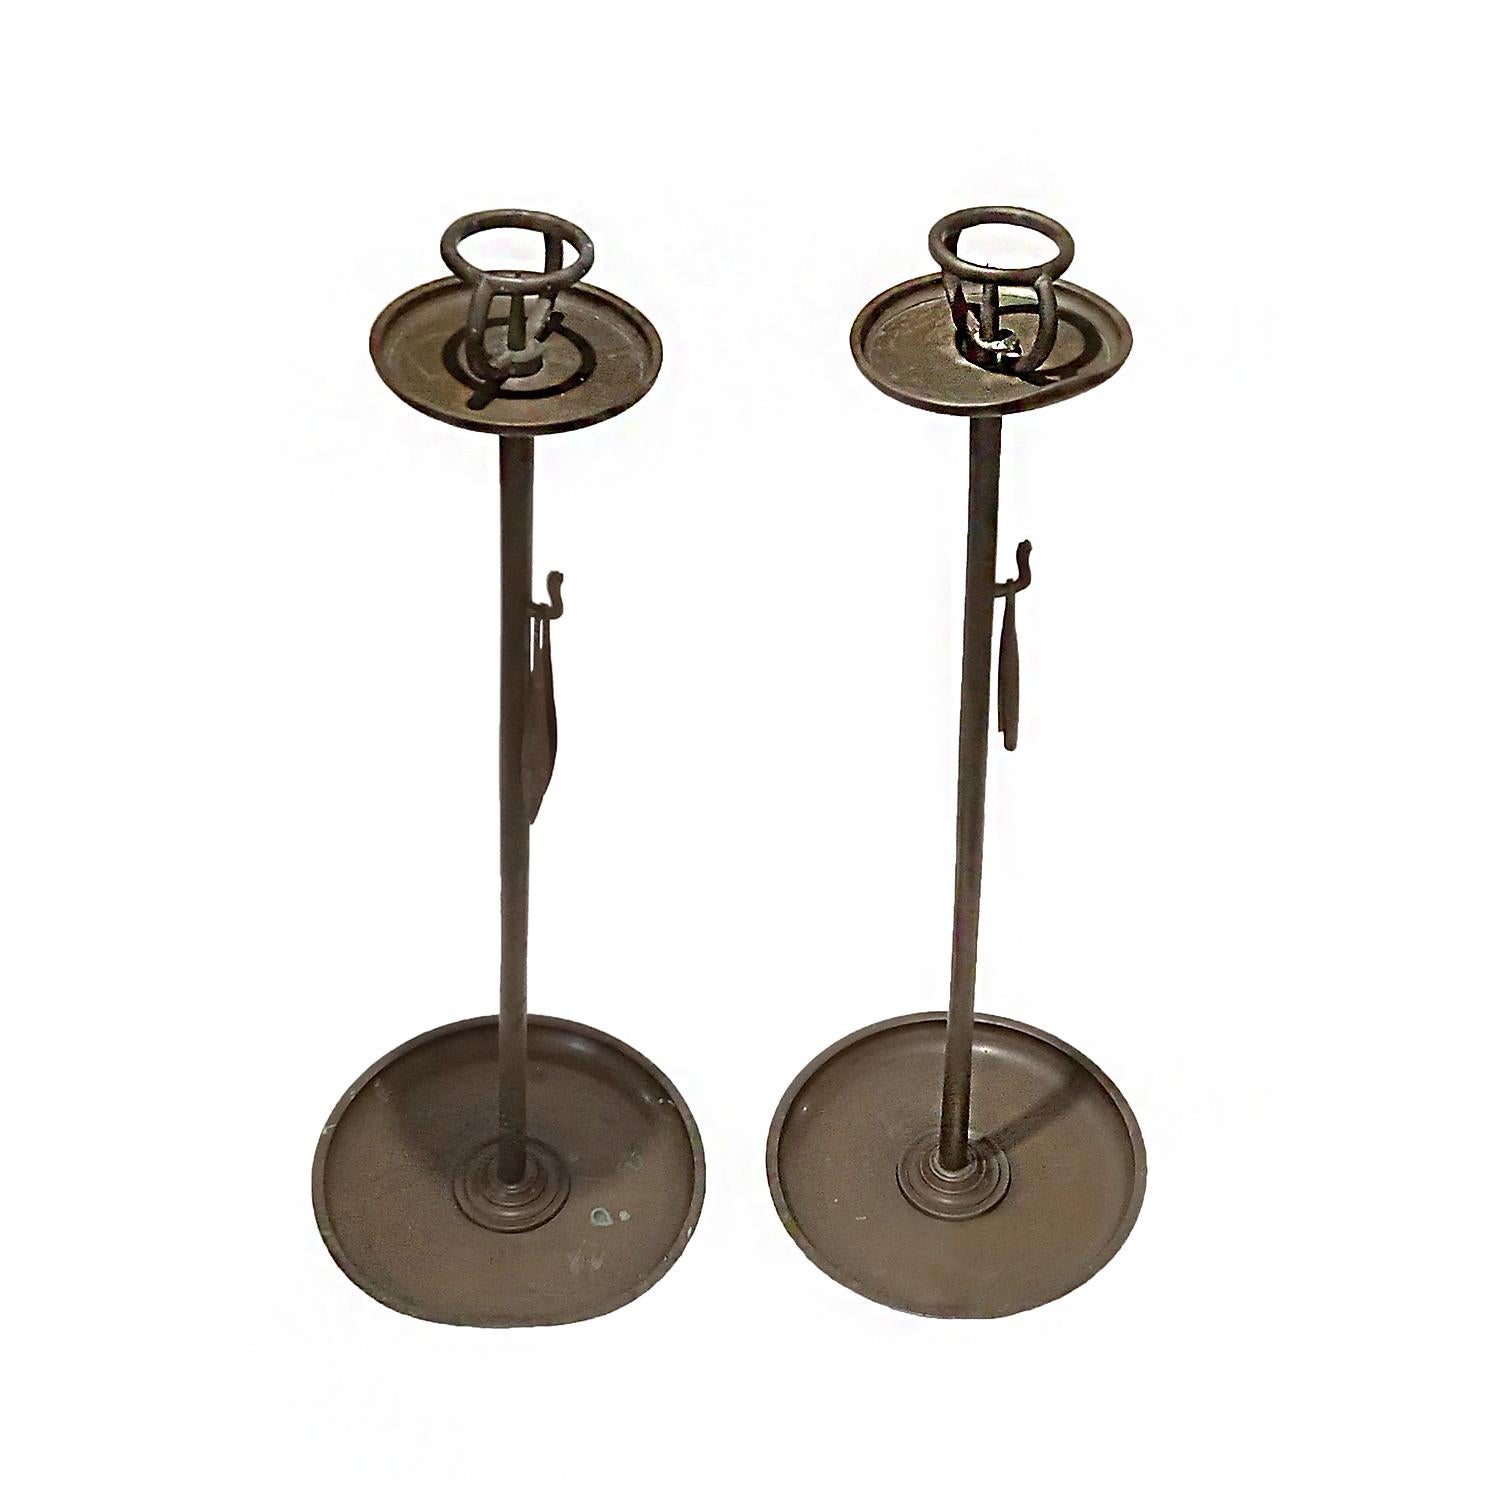 Two tall candlesticks, hand-crafted in bronze, circa 1880. Japan, Meiji Period. 

The base measures 10.25 inches, the height is 29 inches. The top circle plate measures 5 inches, with an inner ring for a 2-inch candle. Both have a patina developed